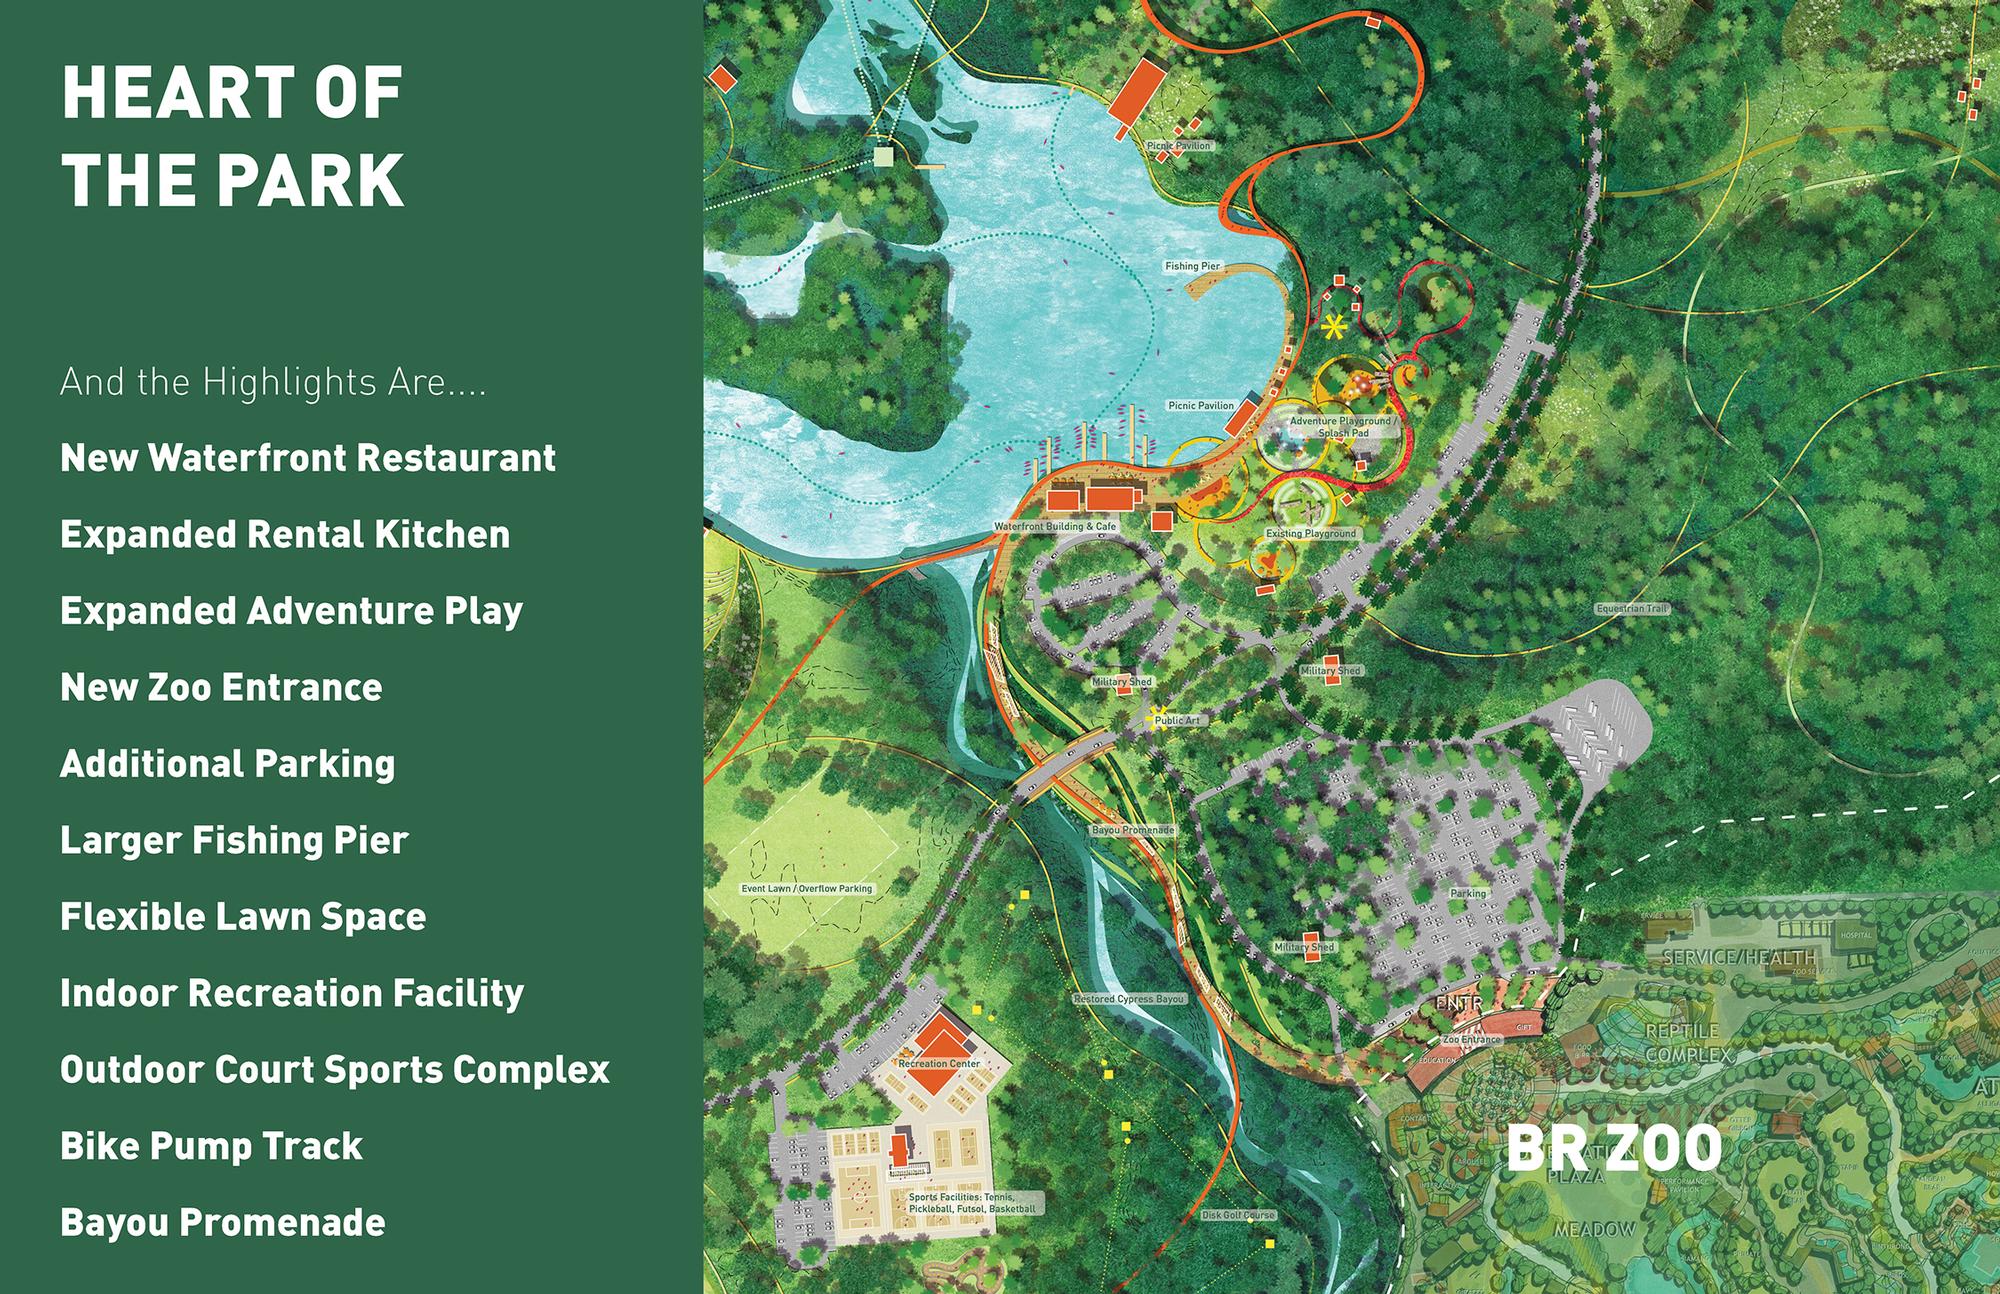 Heart of the Park Plan